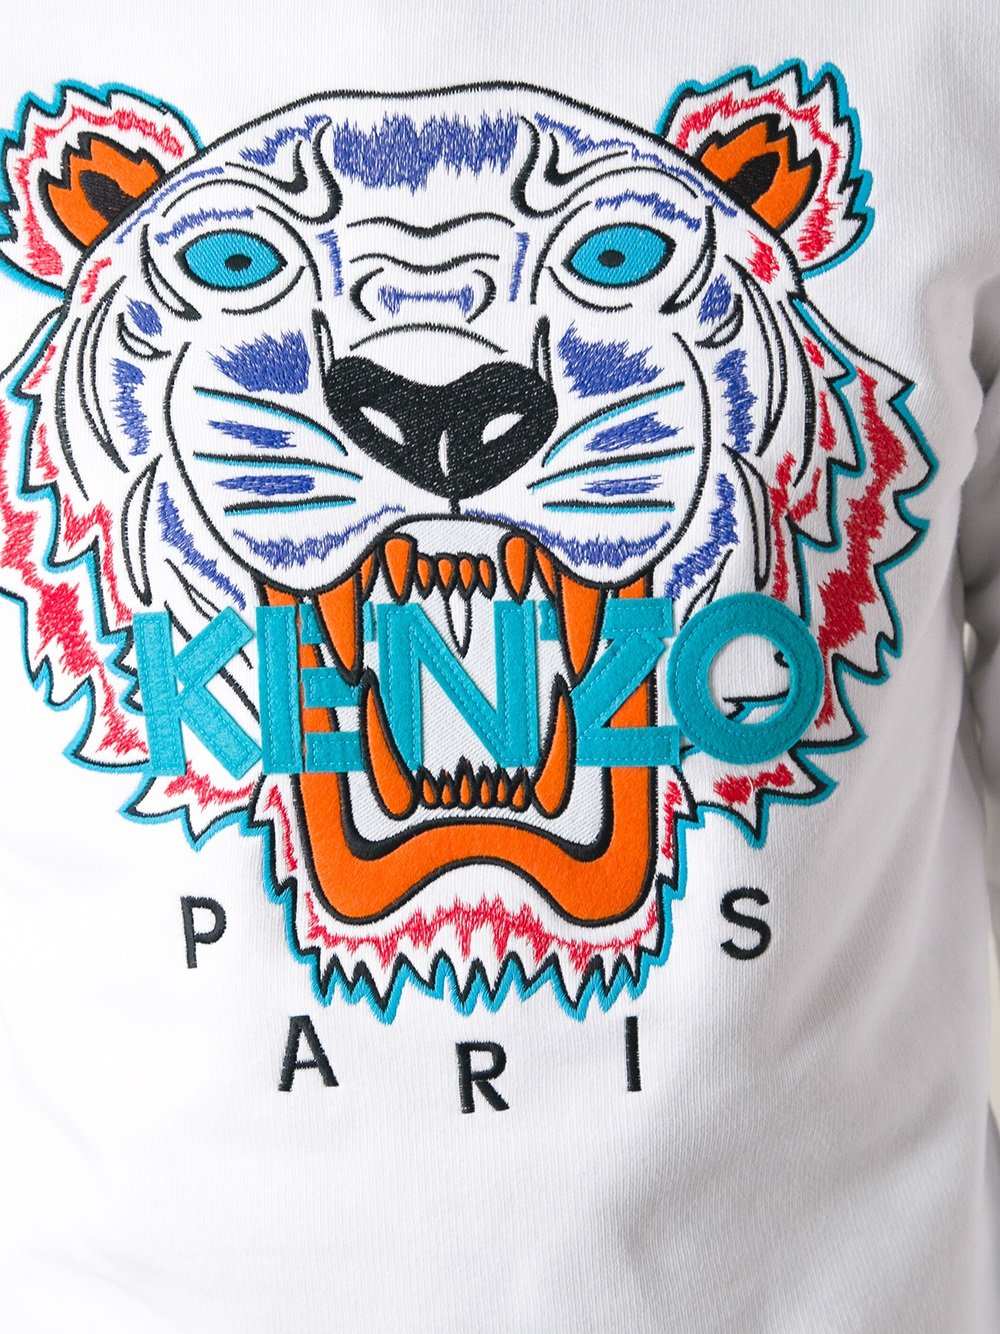 kenzo embroidered